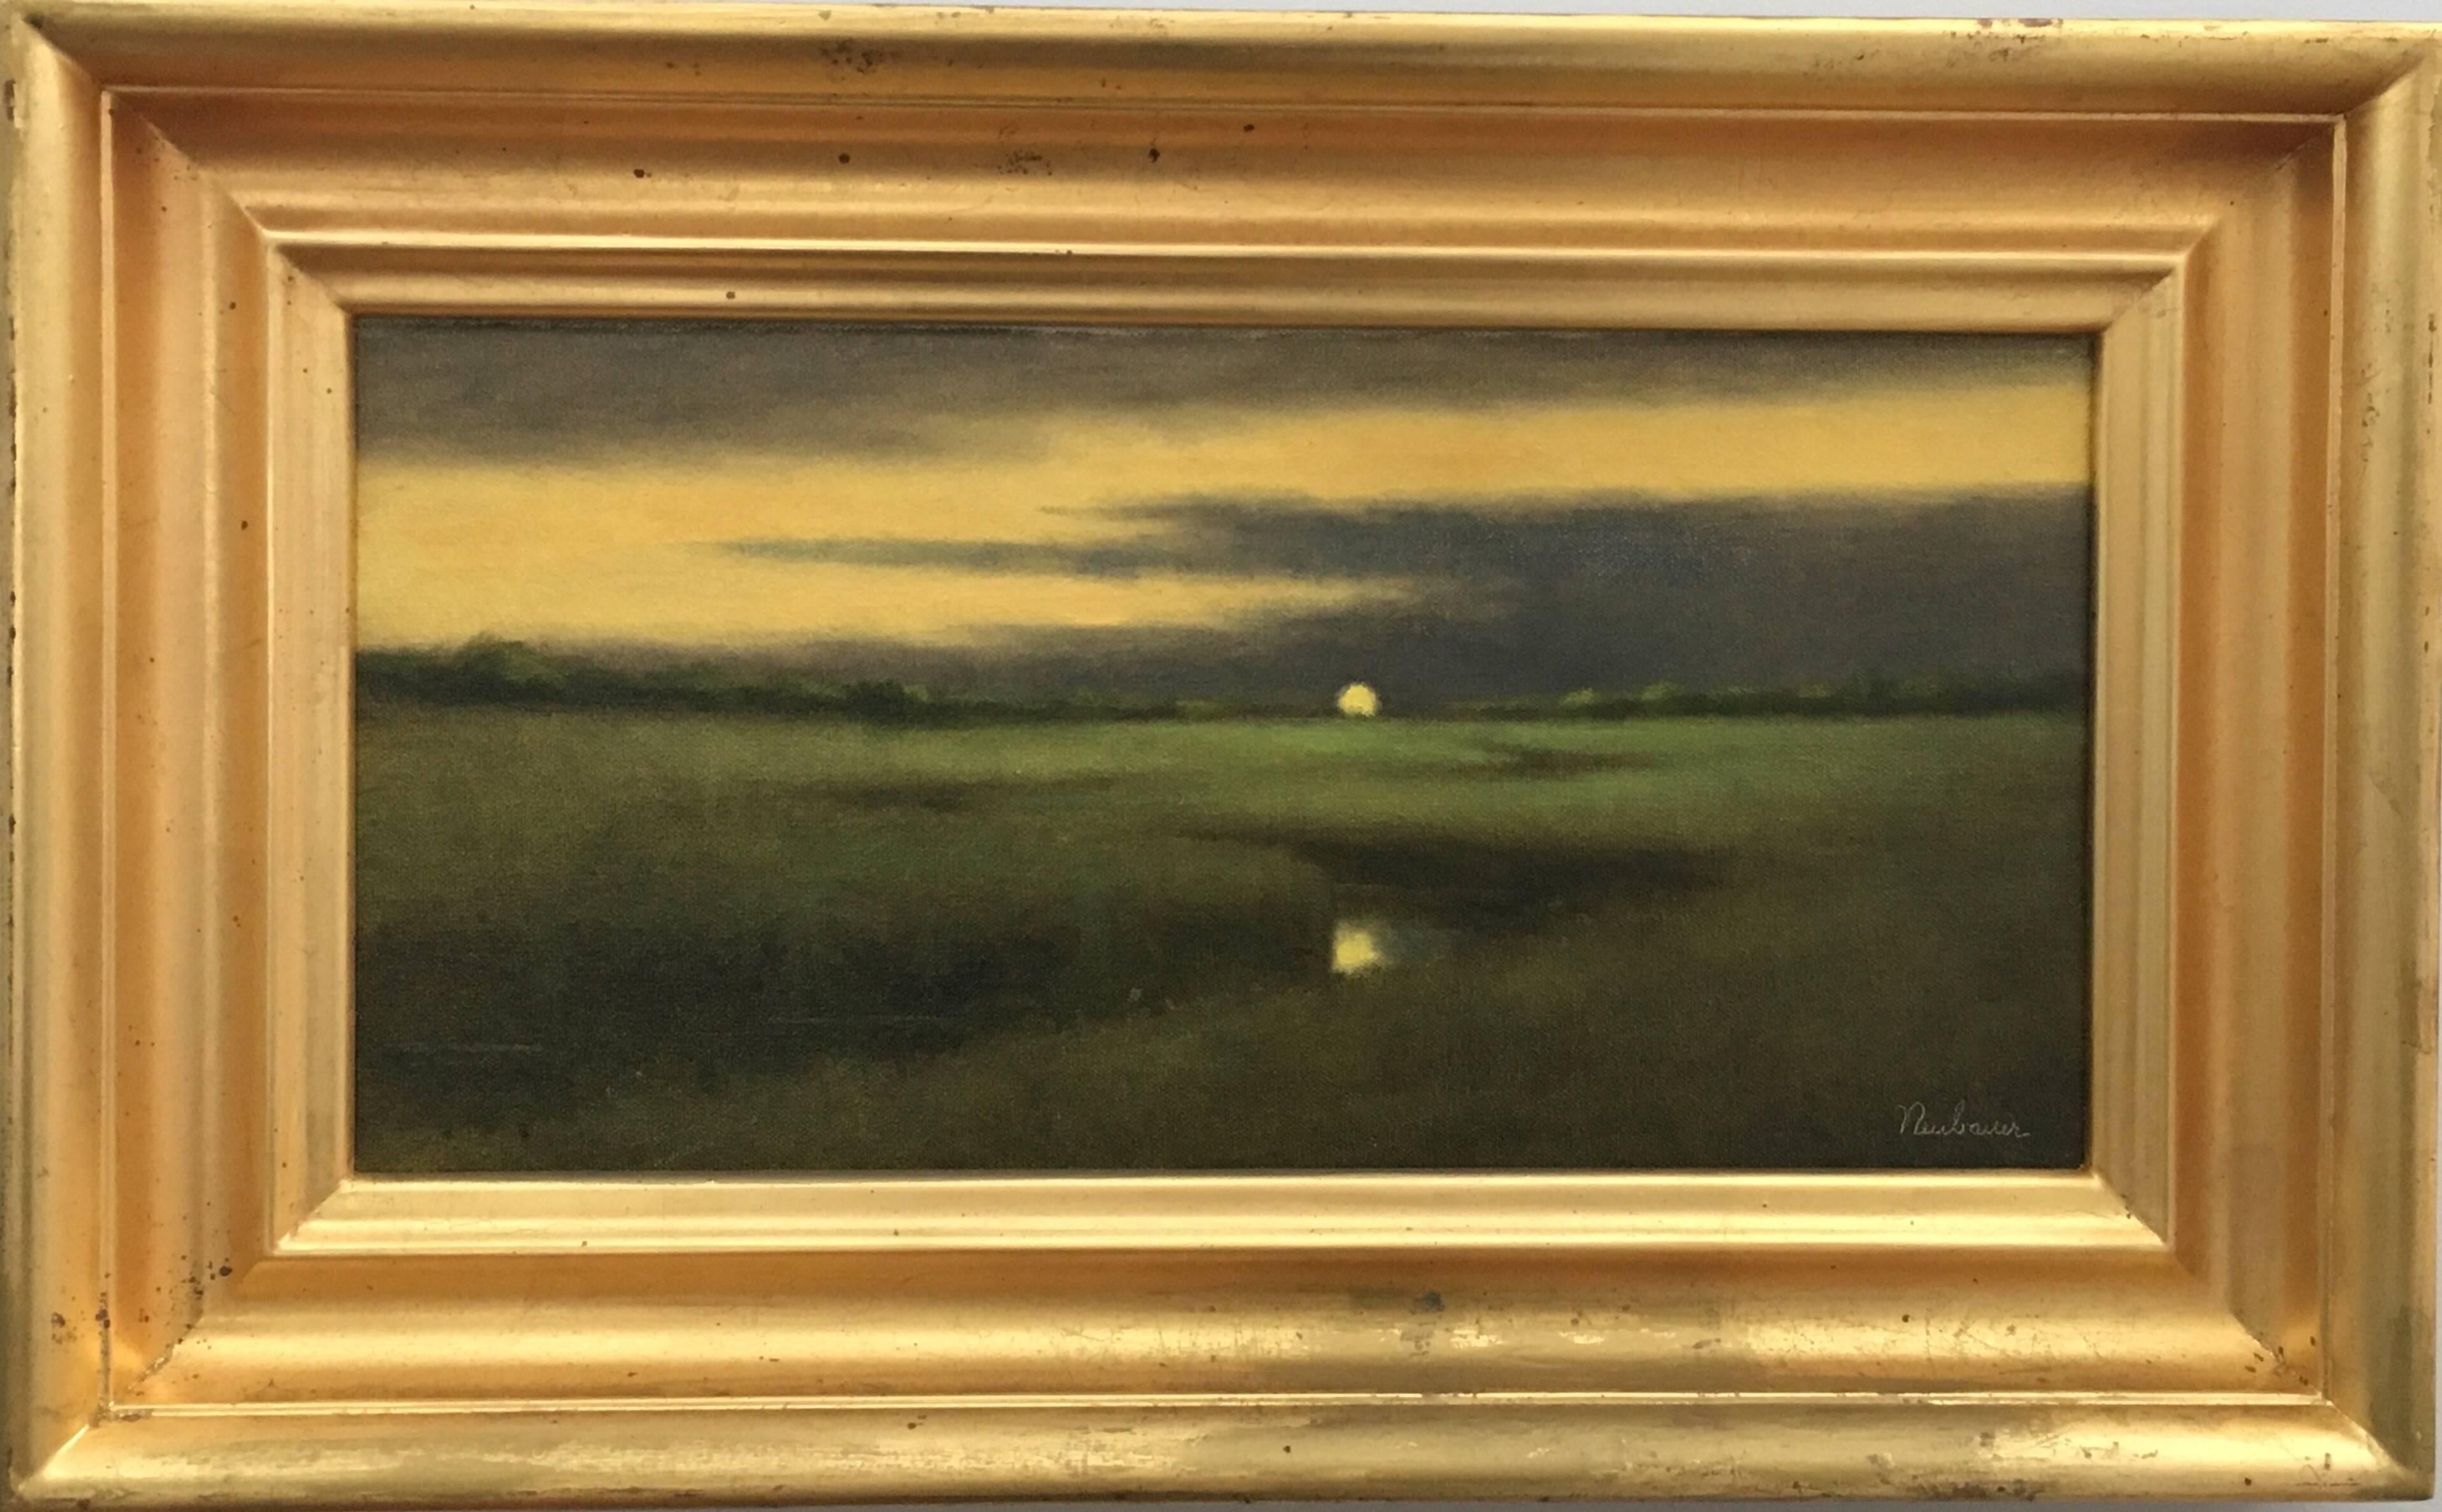 Across the Marsh, an original, signed Oil Landscape Painting on canvas by John D. Neubauer captures the ethereal stillness of an evening moonrise on the horizon of a lush green marsh against golden sky reflecting on a winding river, whose movement